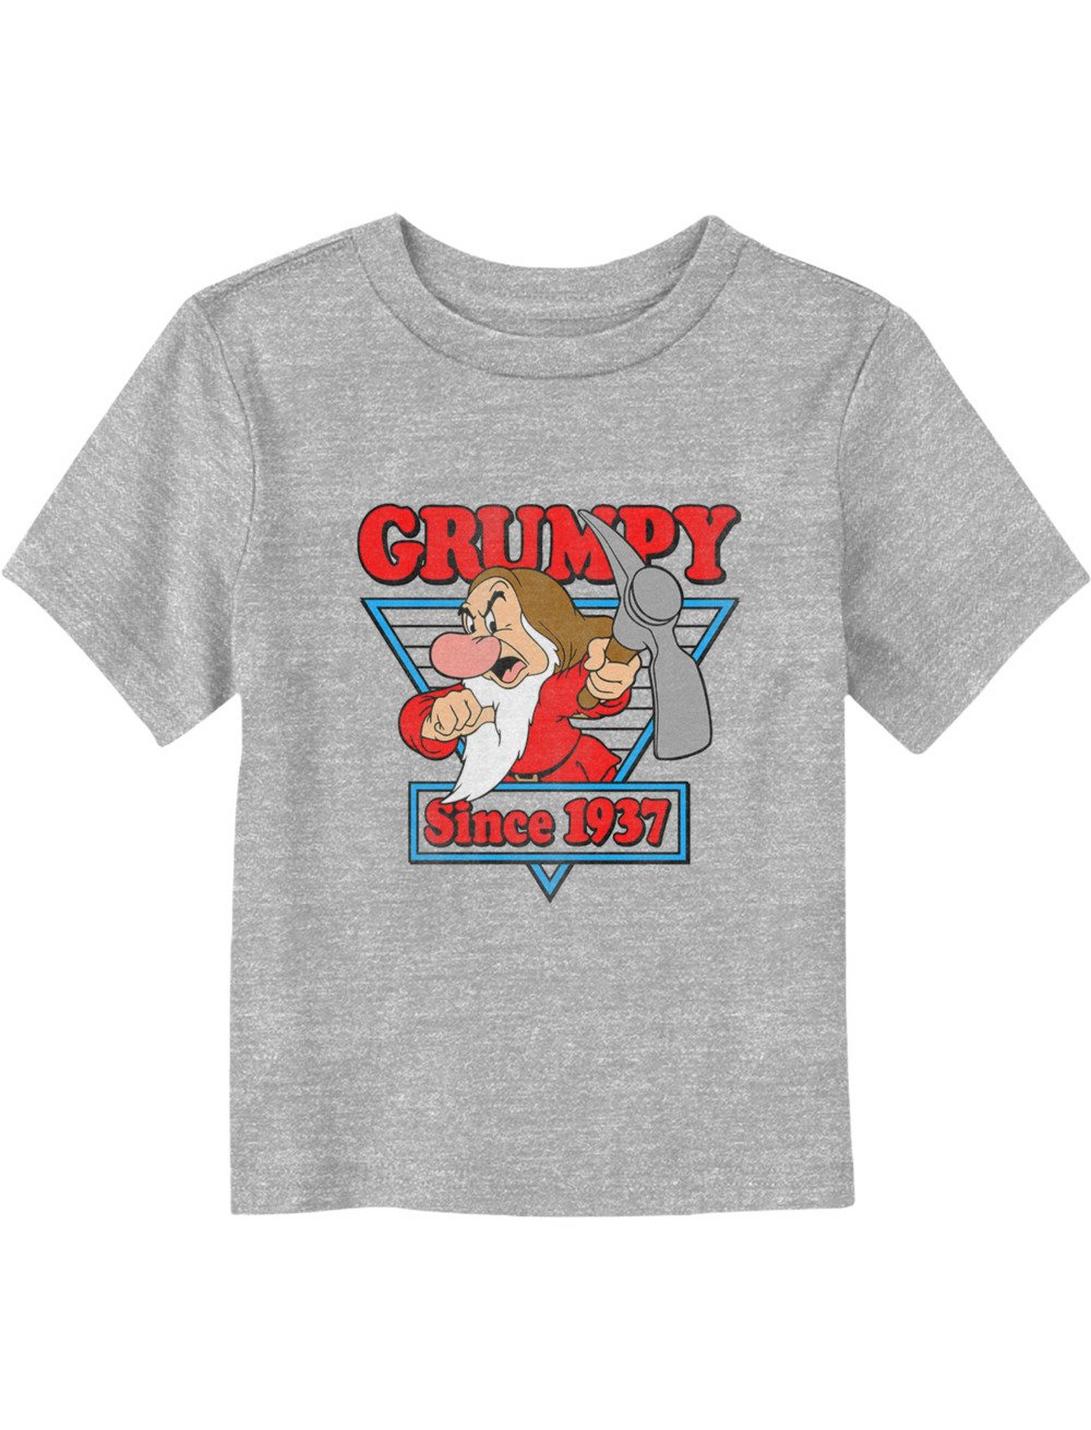 Disney Snow White And The Seven Dwarfs Grumpy Since 1937 Toddler T-Shirt, ATH HTR, hi-res